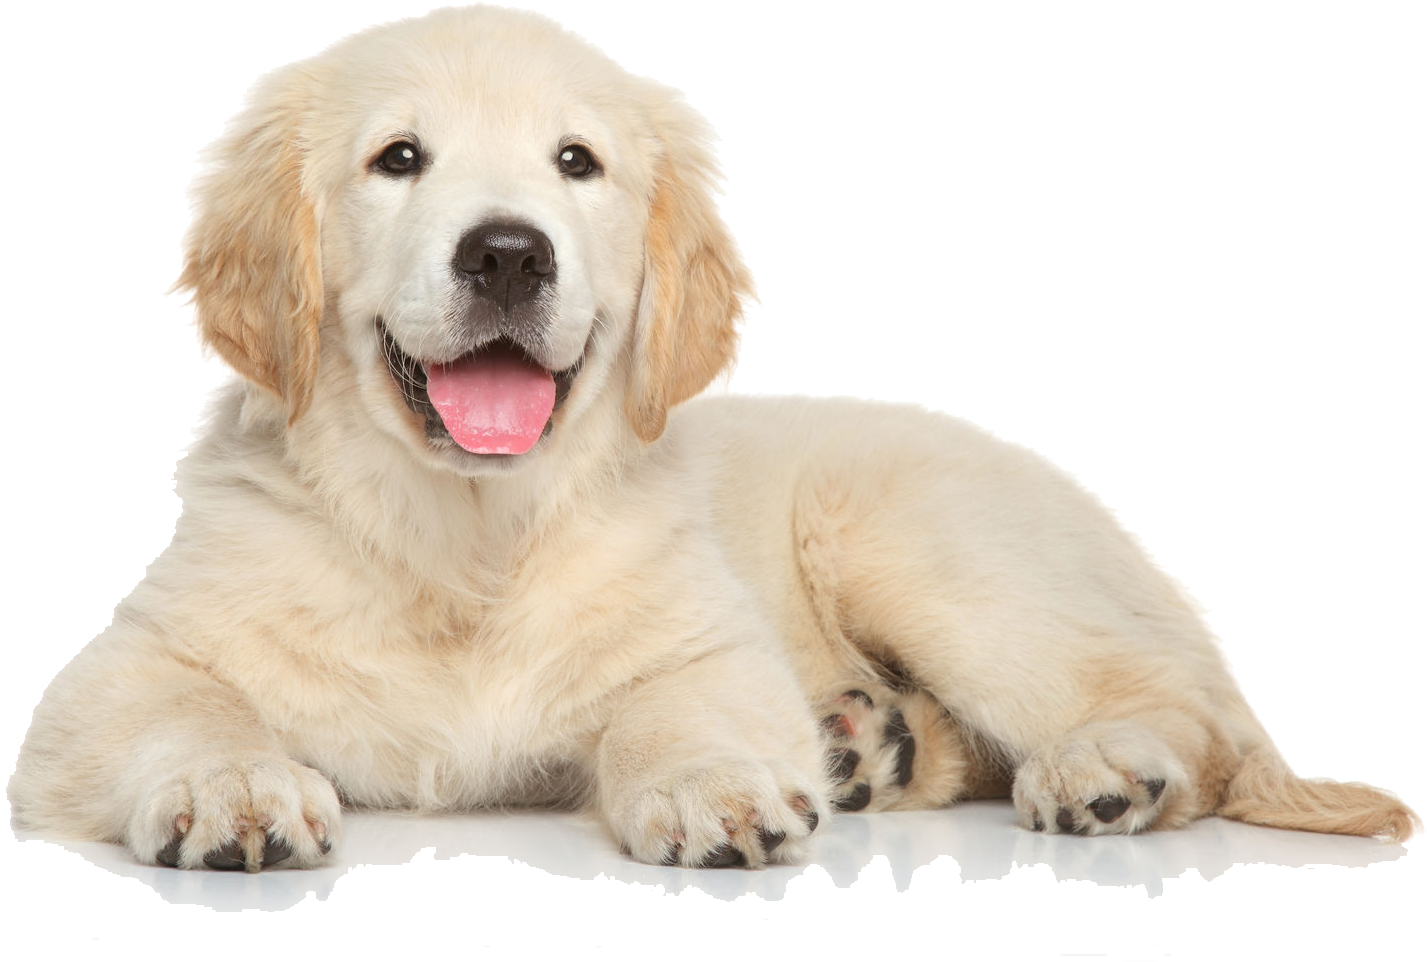 Golden Retriever Puppy Lying Down.png PNG